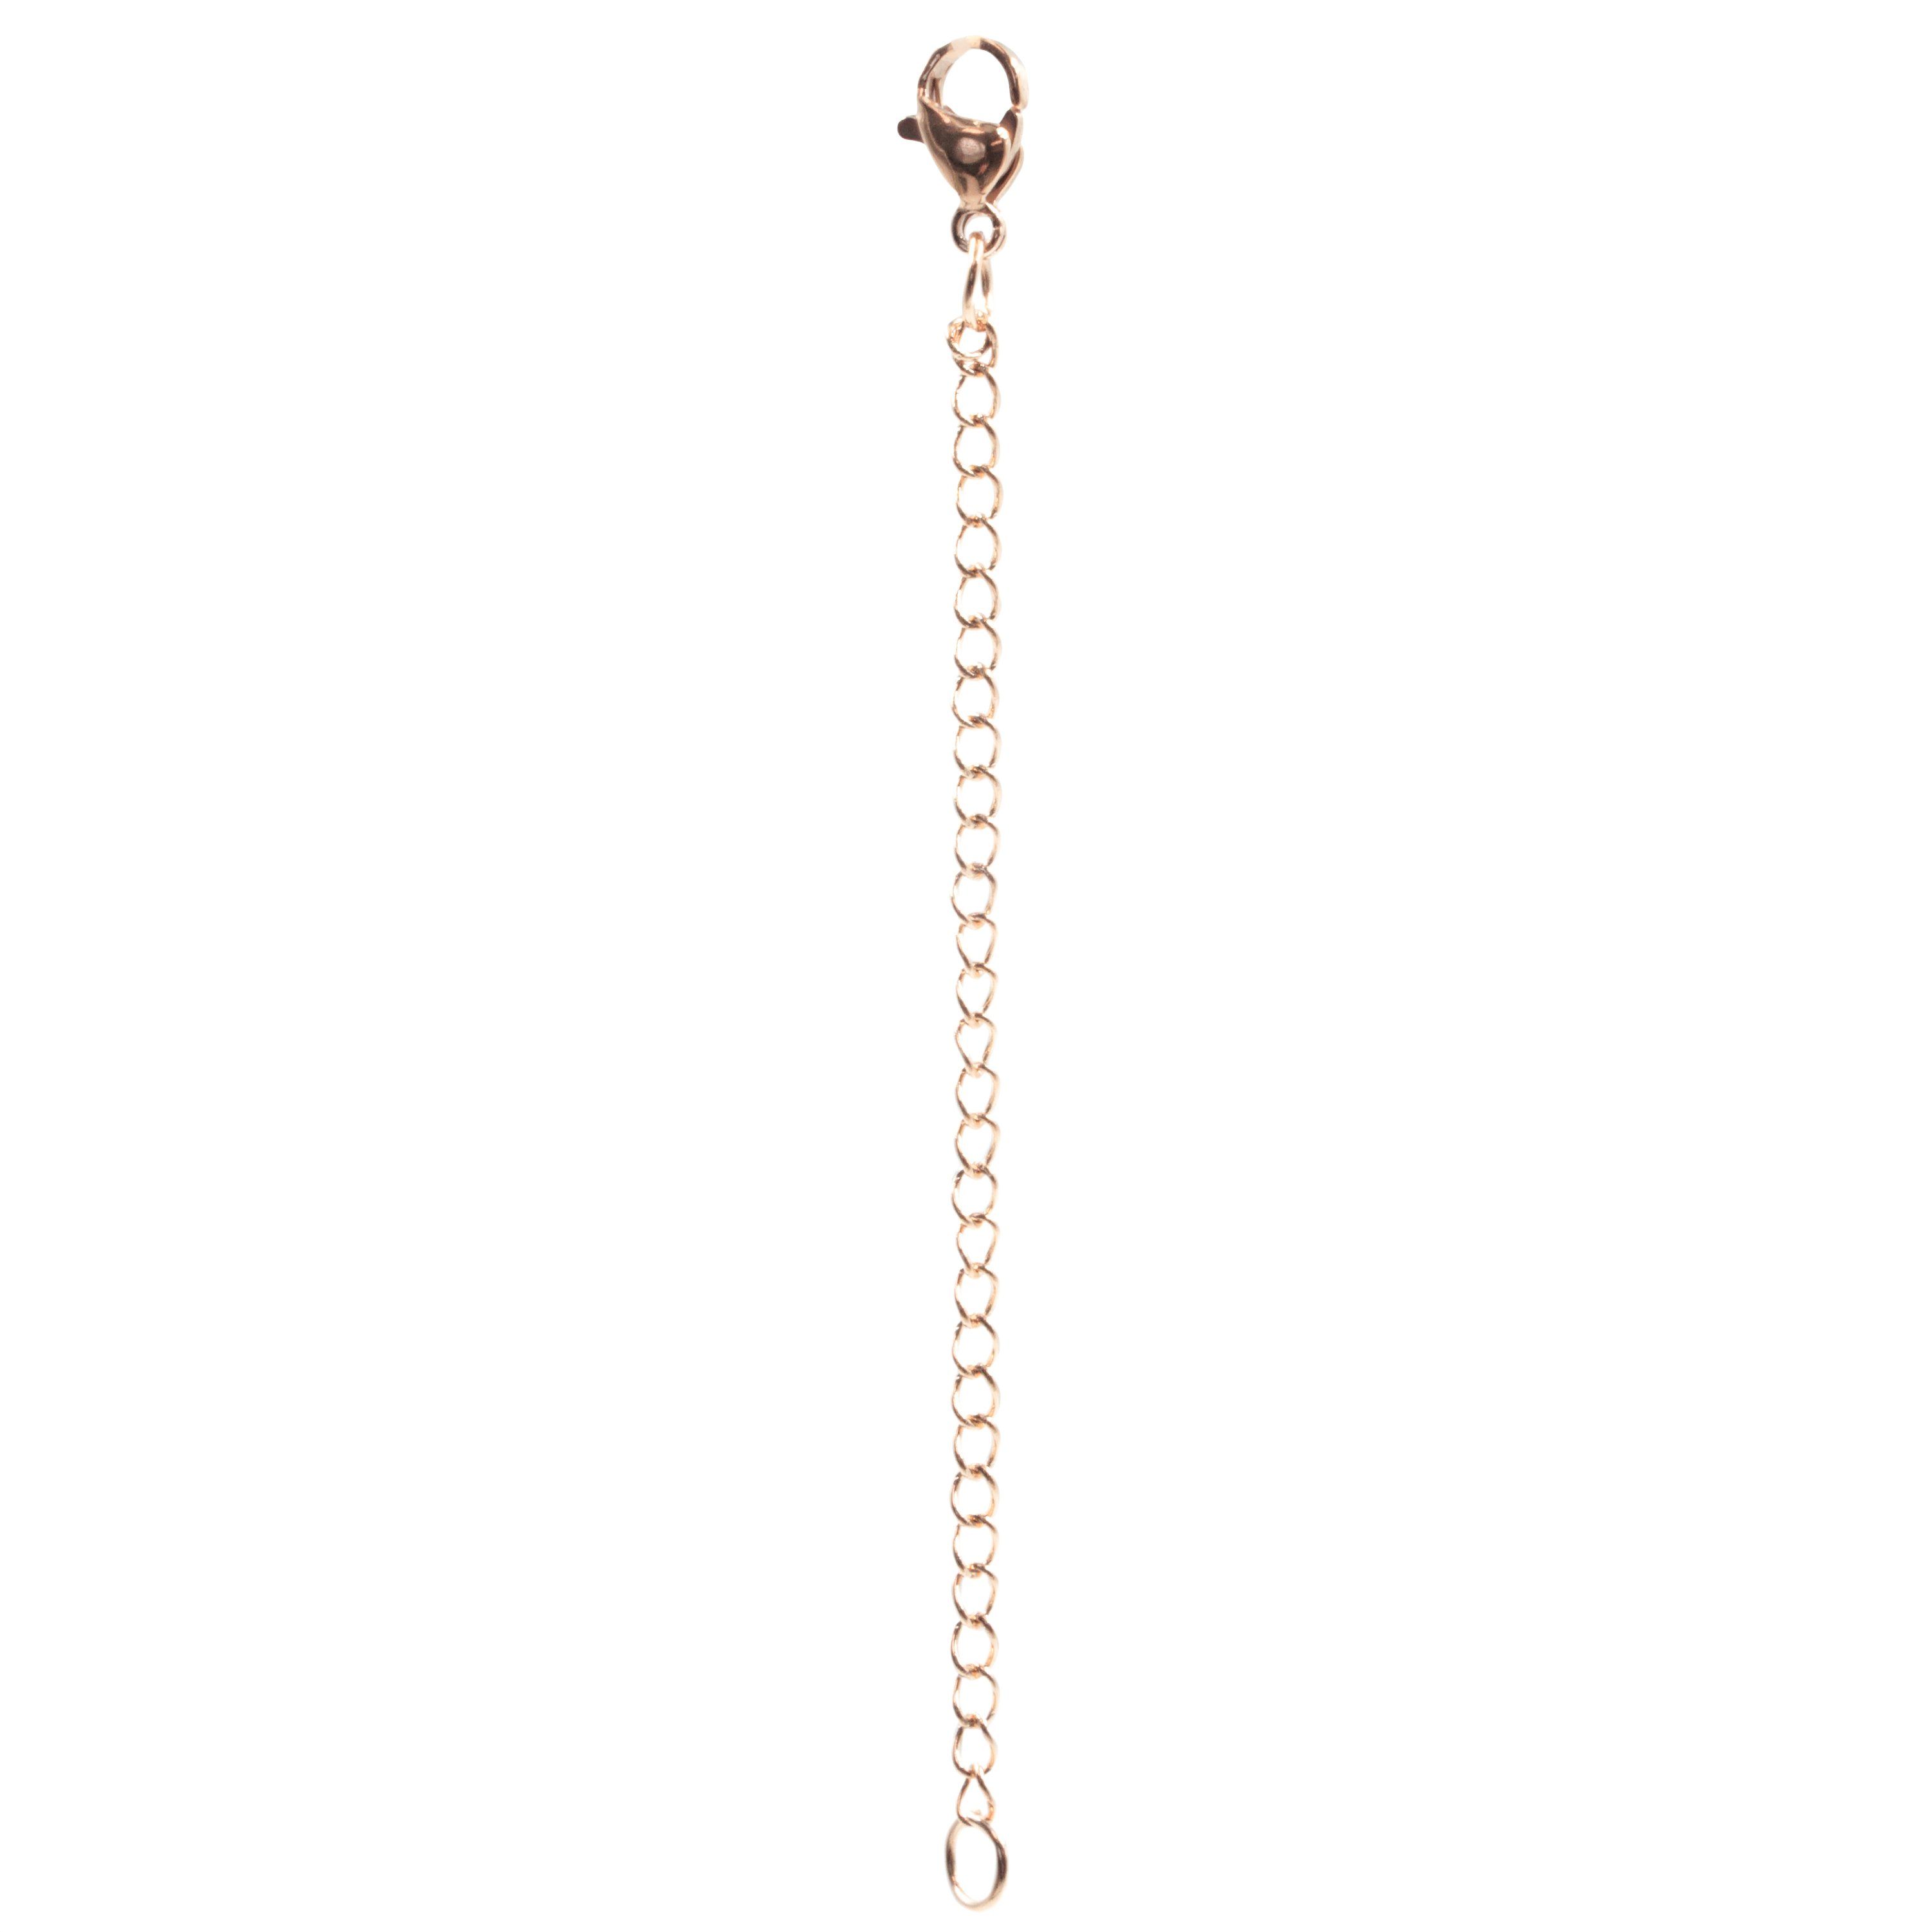 Kinsley Armelle 18K Rose Gold Ion Plated Stainless Steel Pink Lobster Clasp Extender Accessory